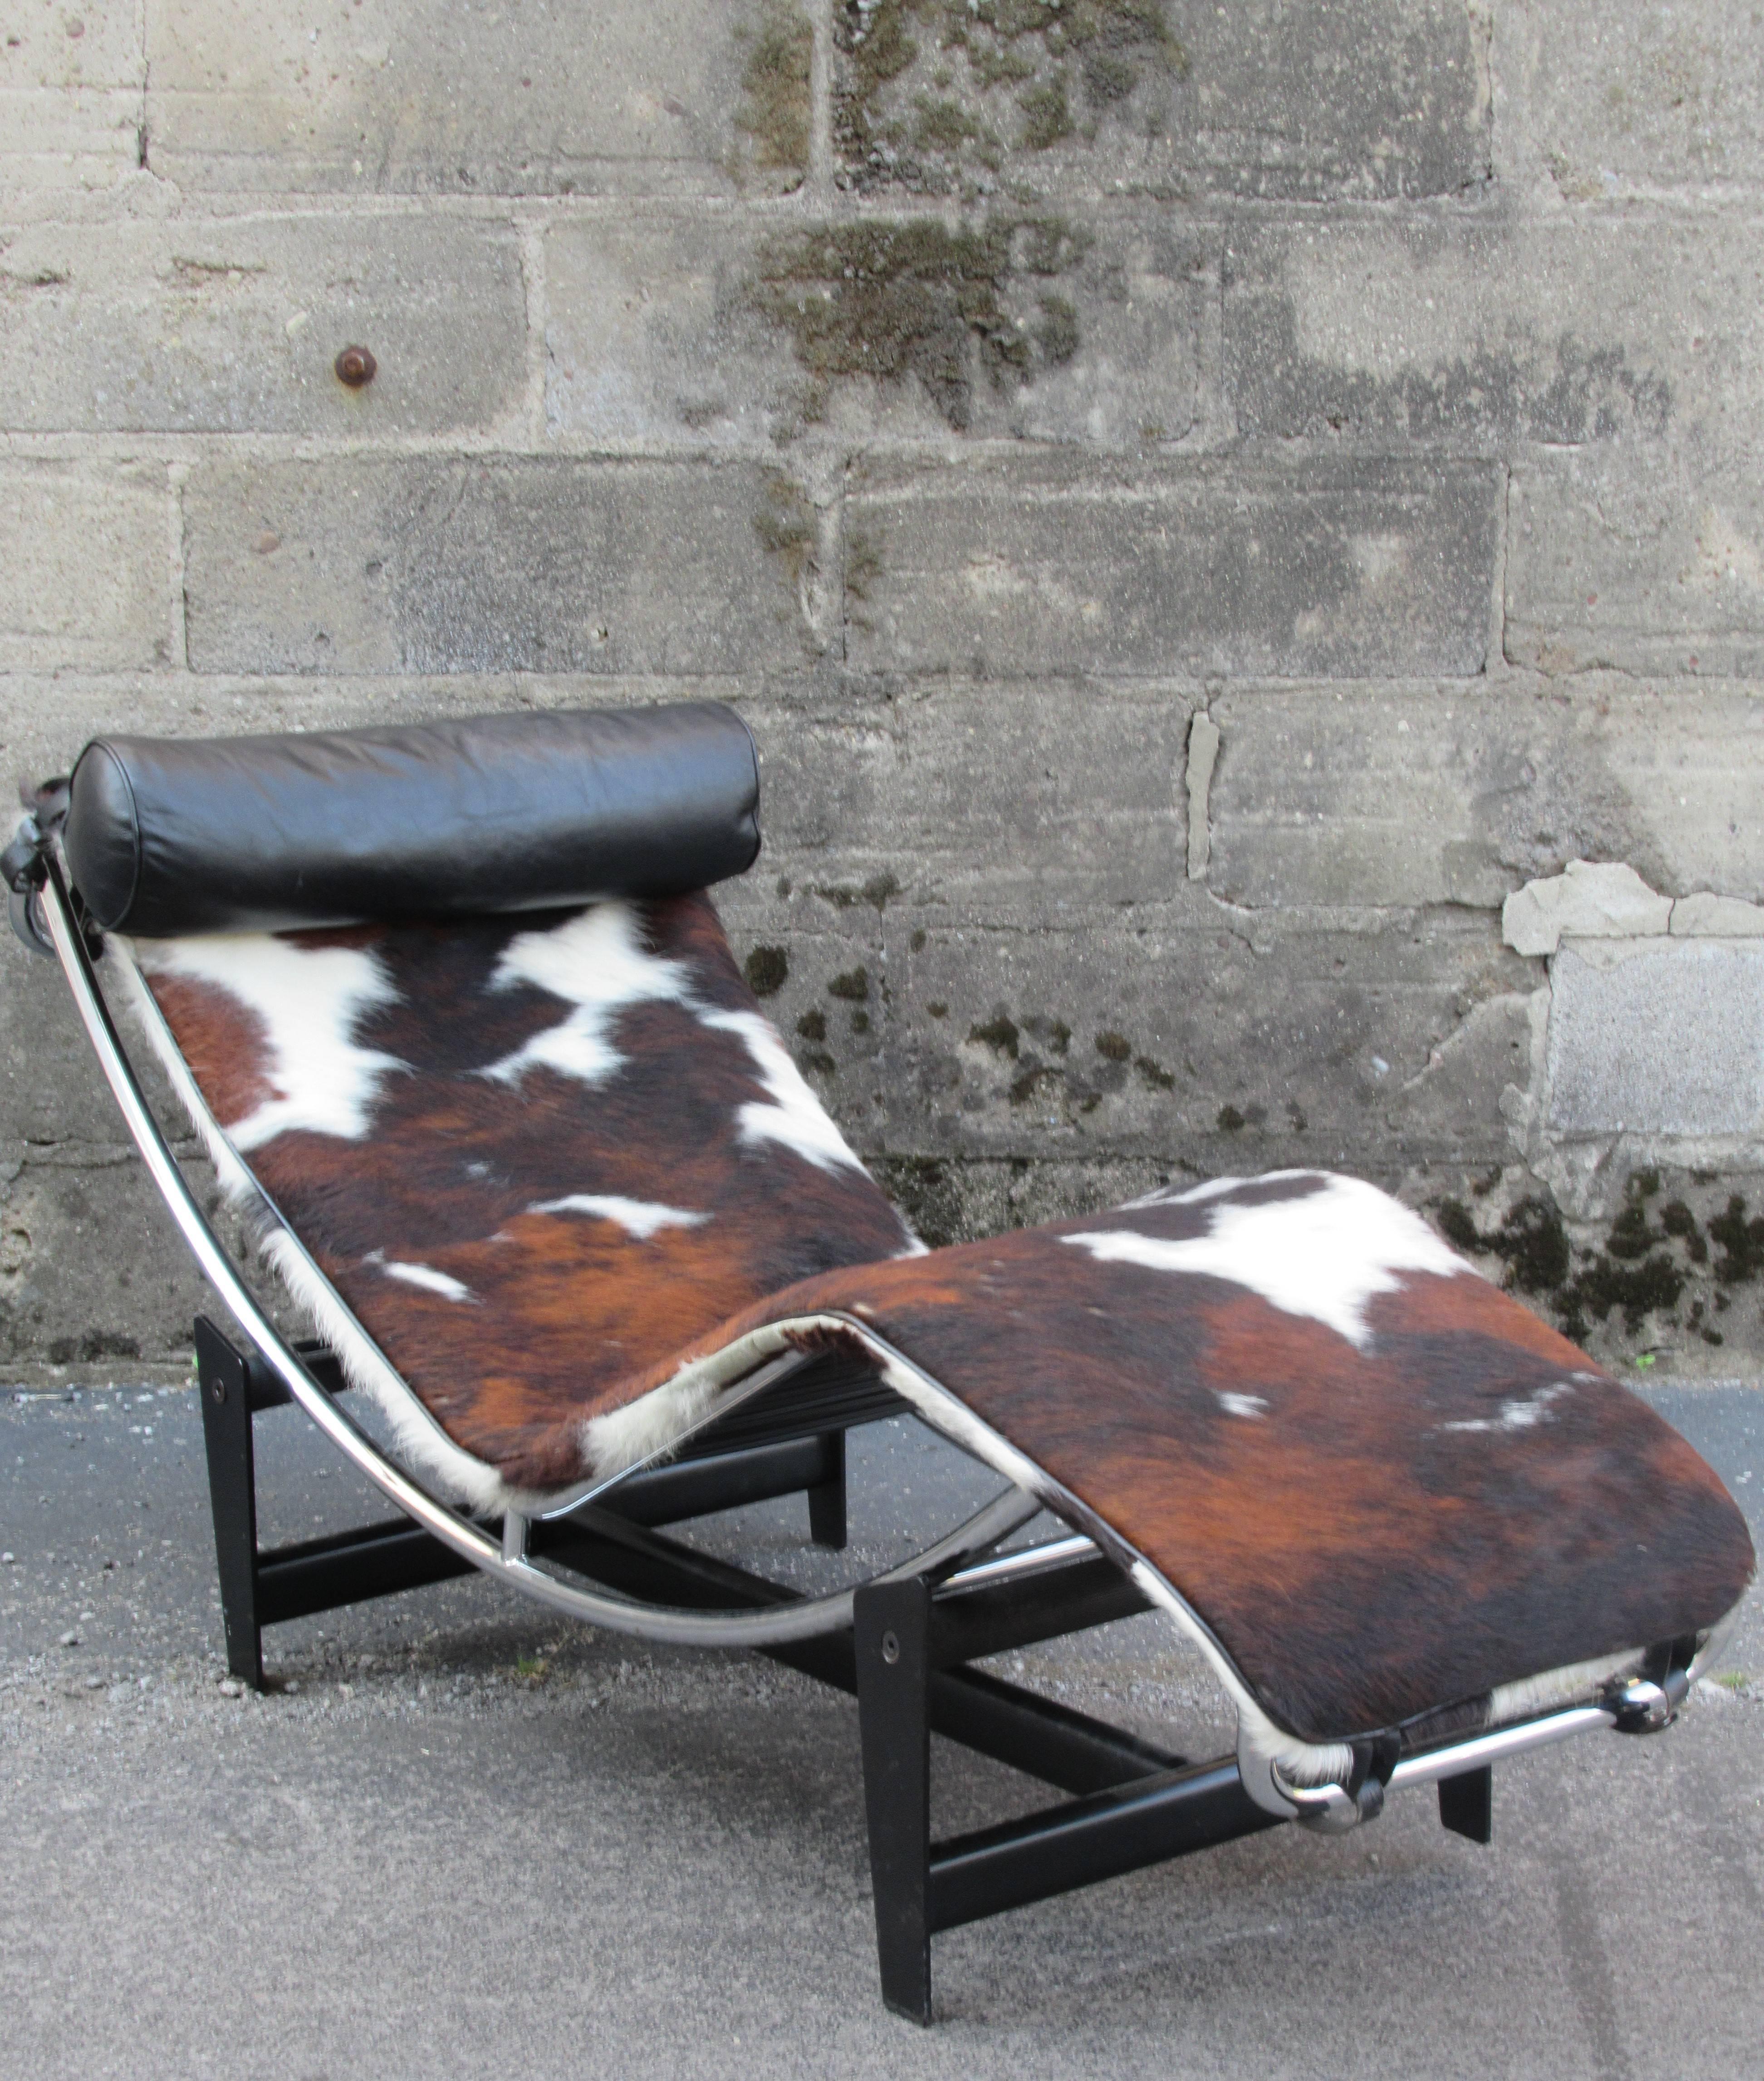 Le Corbusier LC4 style adjustable chaise longue originally designed in 1928 together with Pierre Jeanneret and Charlotte Perriand. This chaise is unmarked - the manufacturer is unknown (possibly Italian made) and of a later date - circa 1980s.